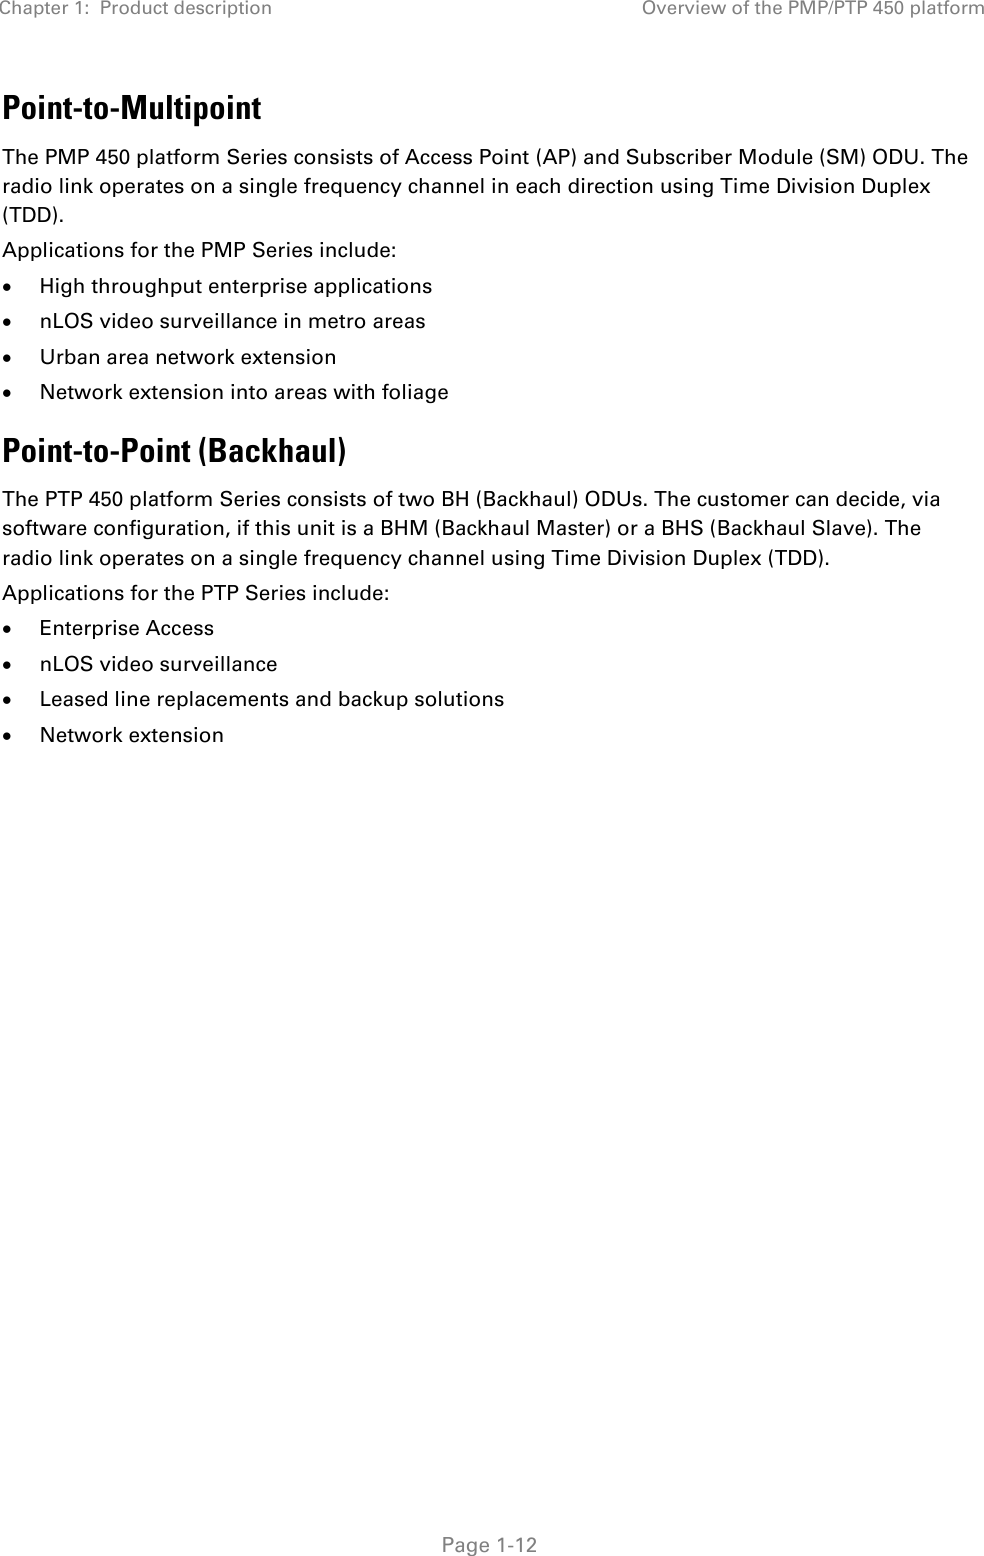 Chapter 1:  Product description Overview of the PMP/PTP 450 platform   Page 1-12 Point-to-Multipoint The PMP 450 platform Series consists of Access Point (AP) and Subscriber Module (SM) ODU. The radio link operates on a single frequency channel in each direction using Time Division Duplex (TDD). Applications for the PMP Series include:  High throughput enterprise applications  nLOS video surveillance in metro areas  Urban area network extension  Network extension into areas with foliage Point-to-Point (Backhaul) The PTP 450 platform Series consists of two BH (Backhaul) ODUs. The customer can decide, via software configuration, if this unit is a BHM (Backhaul Master) or a BHS (Backhaul Slave). The radio link operates on a single frequency channel using Time Division Duplex (TDD). Applications for the PTP Series include:  Enterprise Access  nLOS video surveillance  Leased line replacements and backup solutions  Network extension   